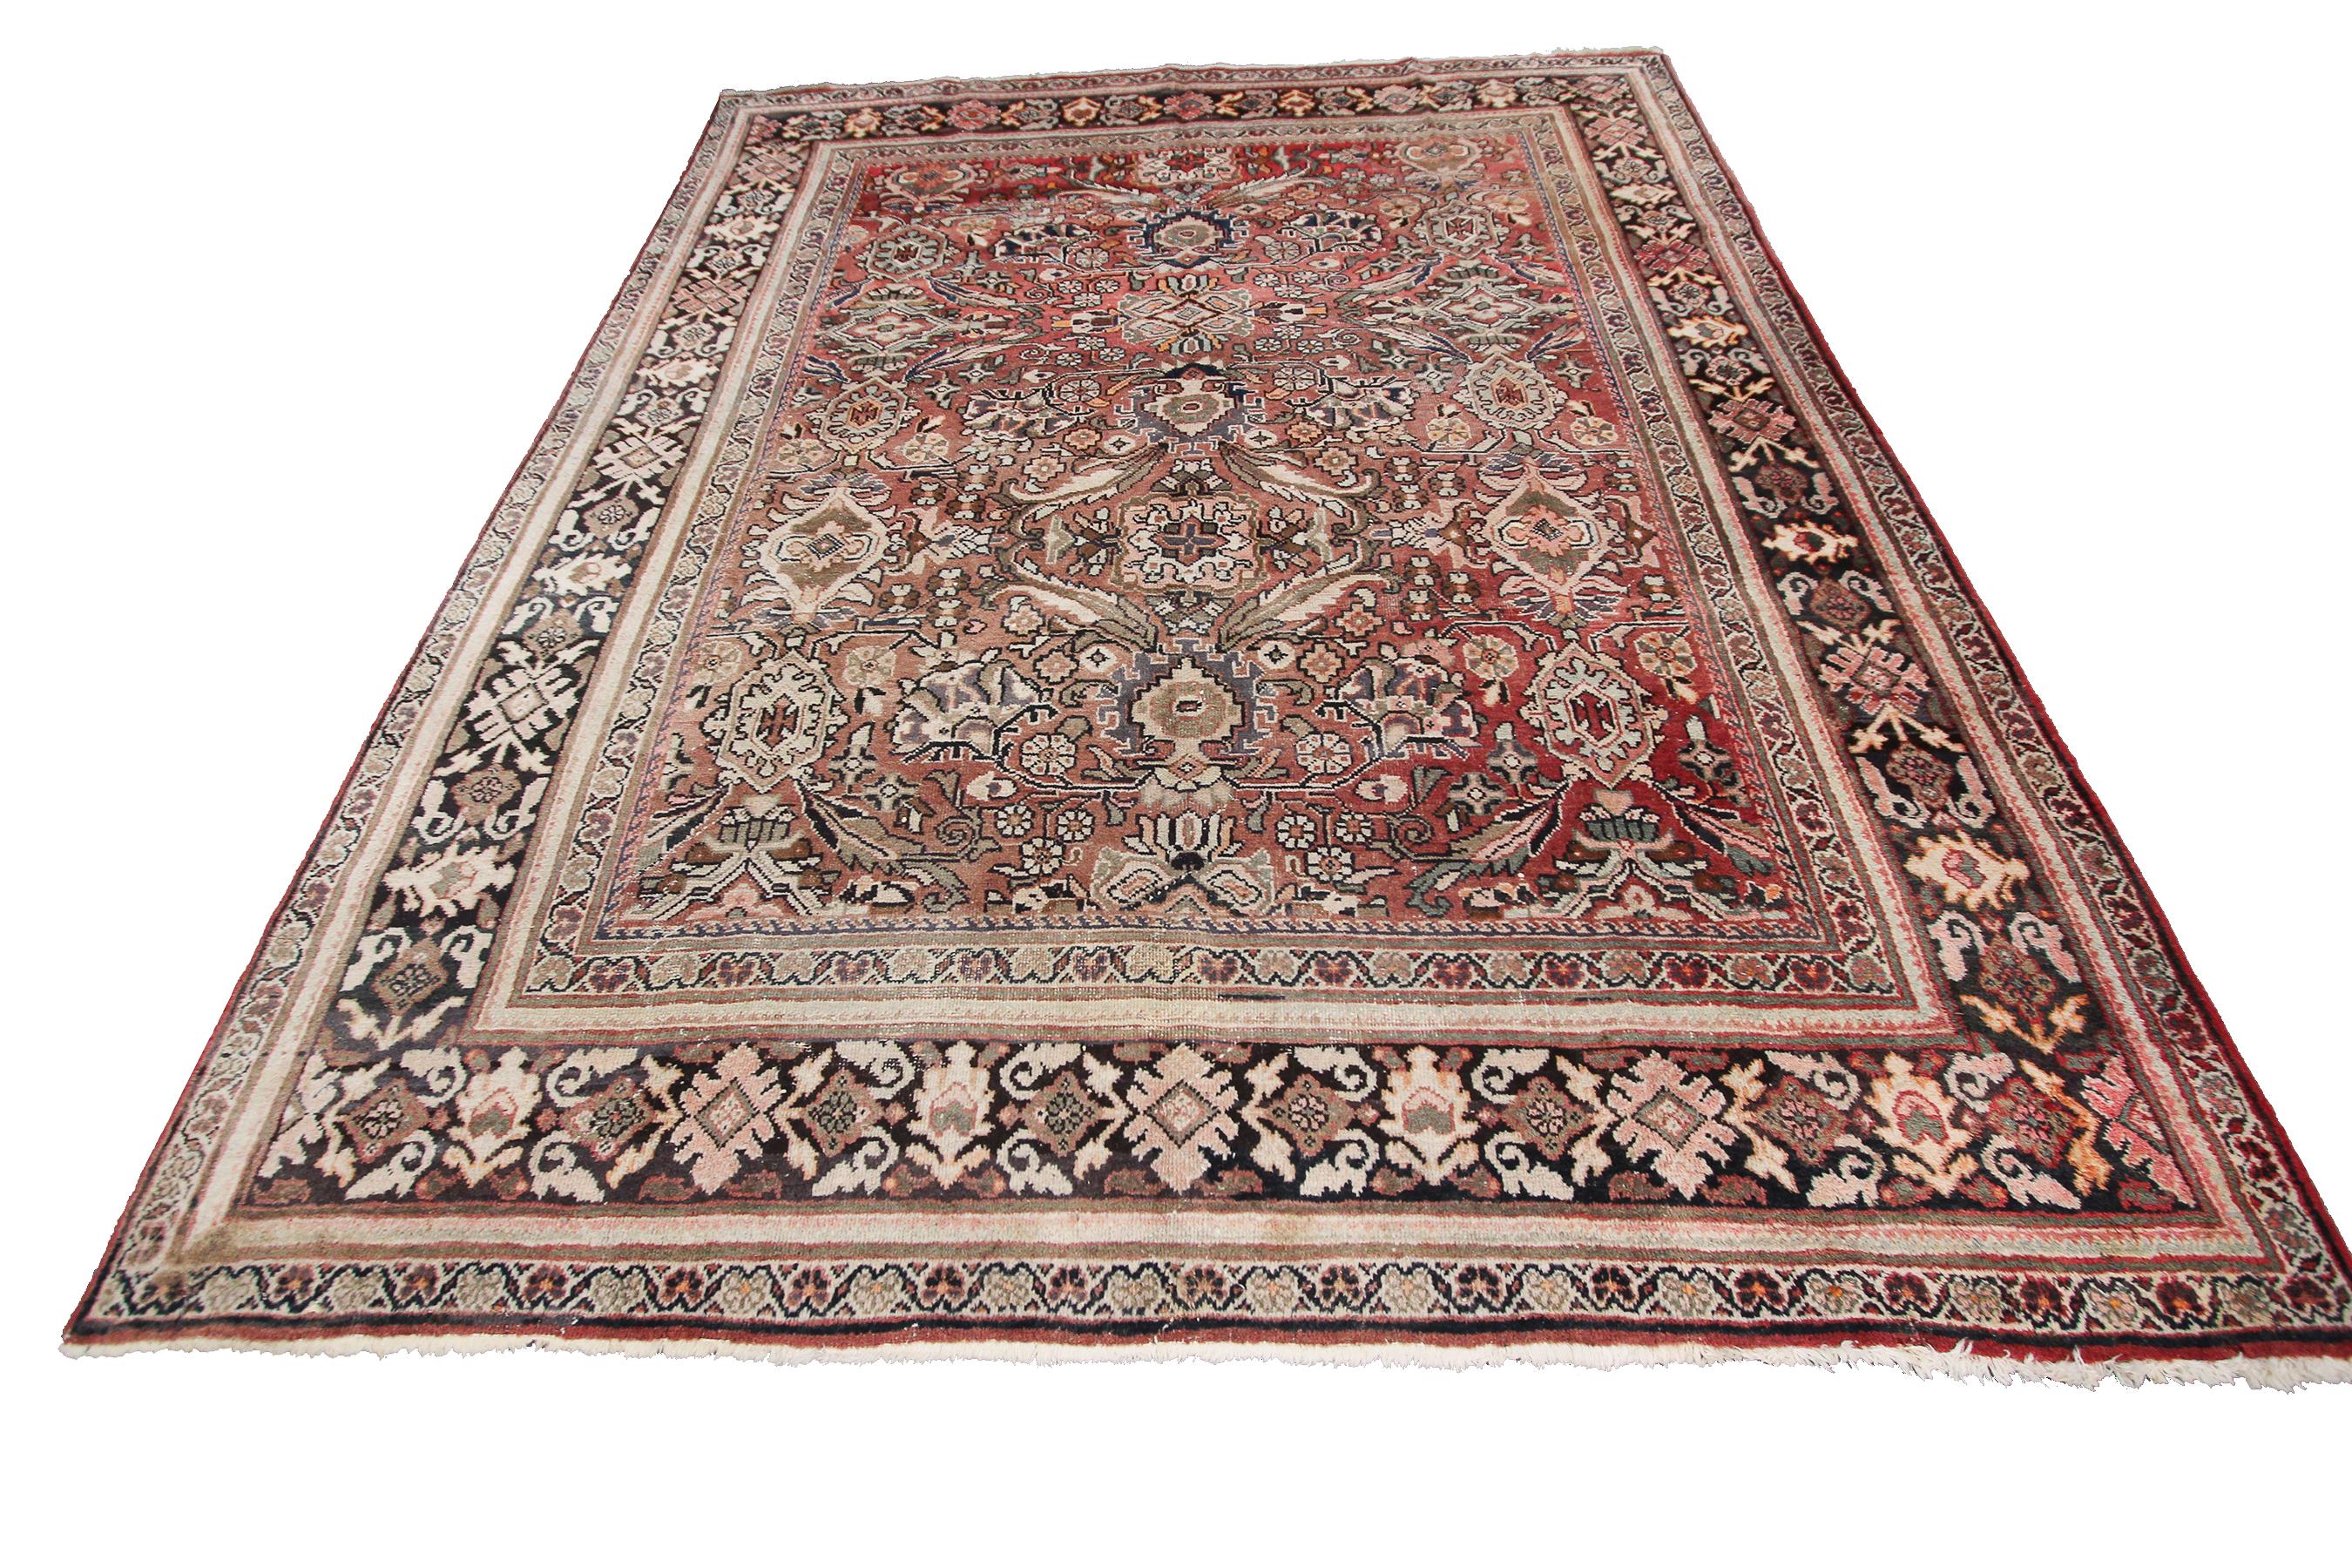 Early 20th Century Large Antique Persian Sultanabad Rug Antique Mahal Geometric, 1920 For Sale